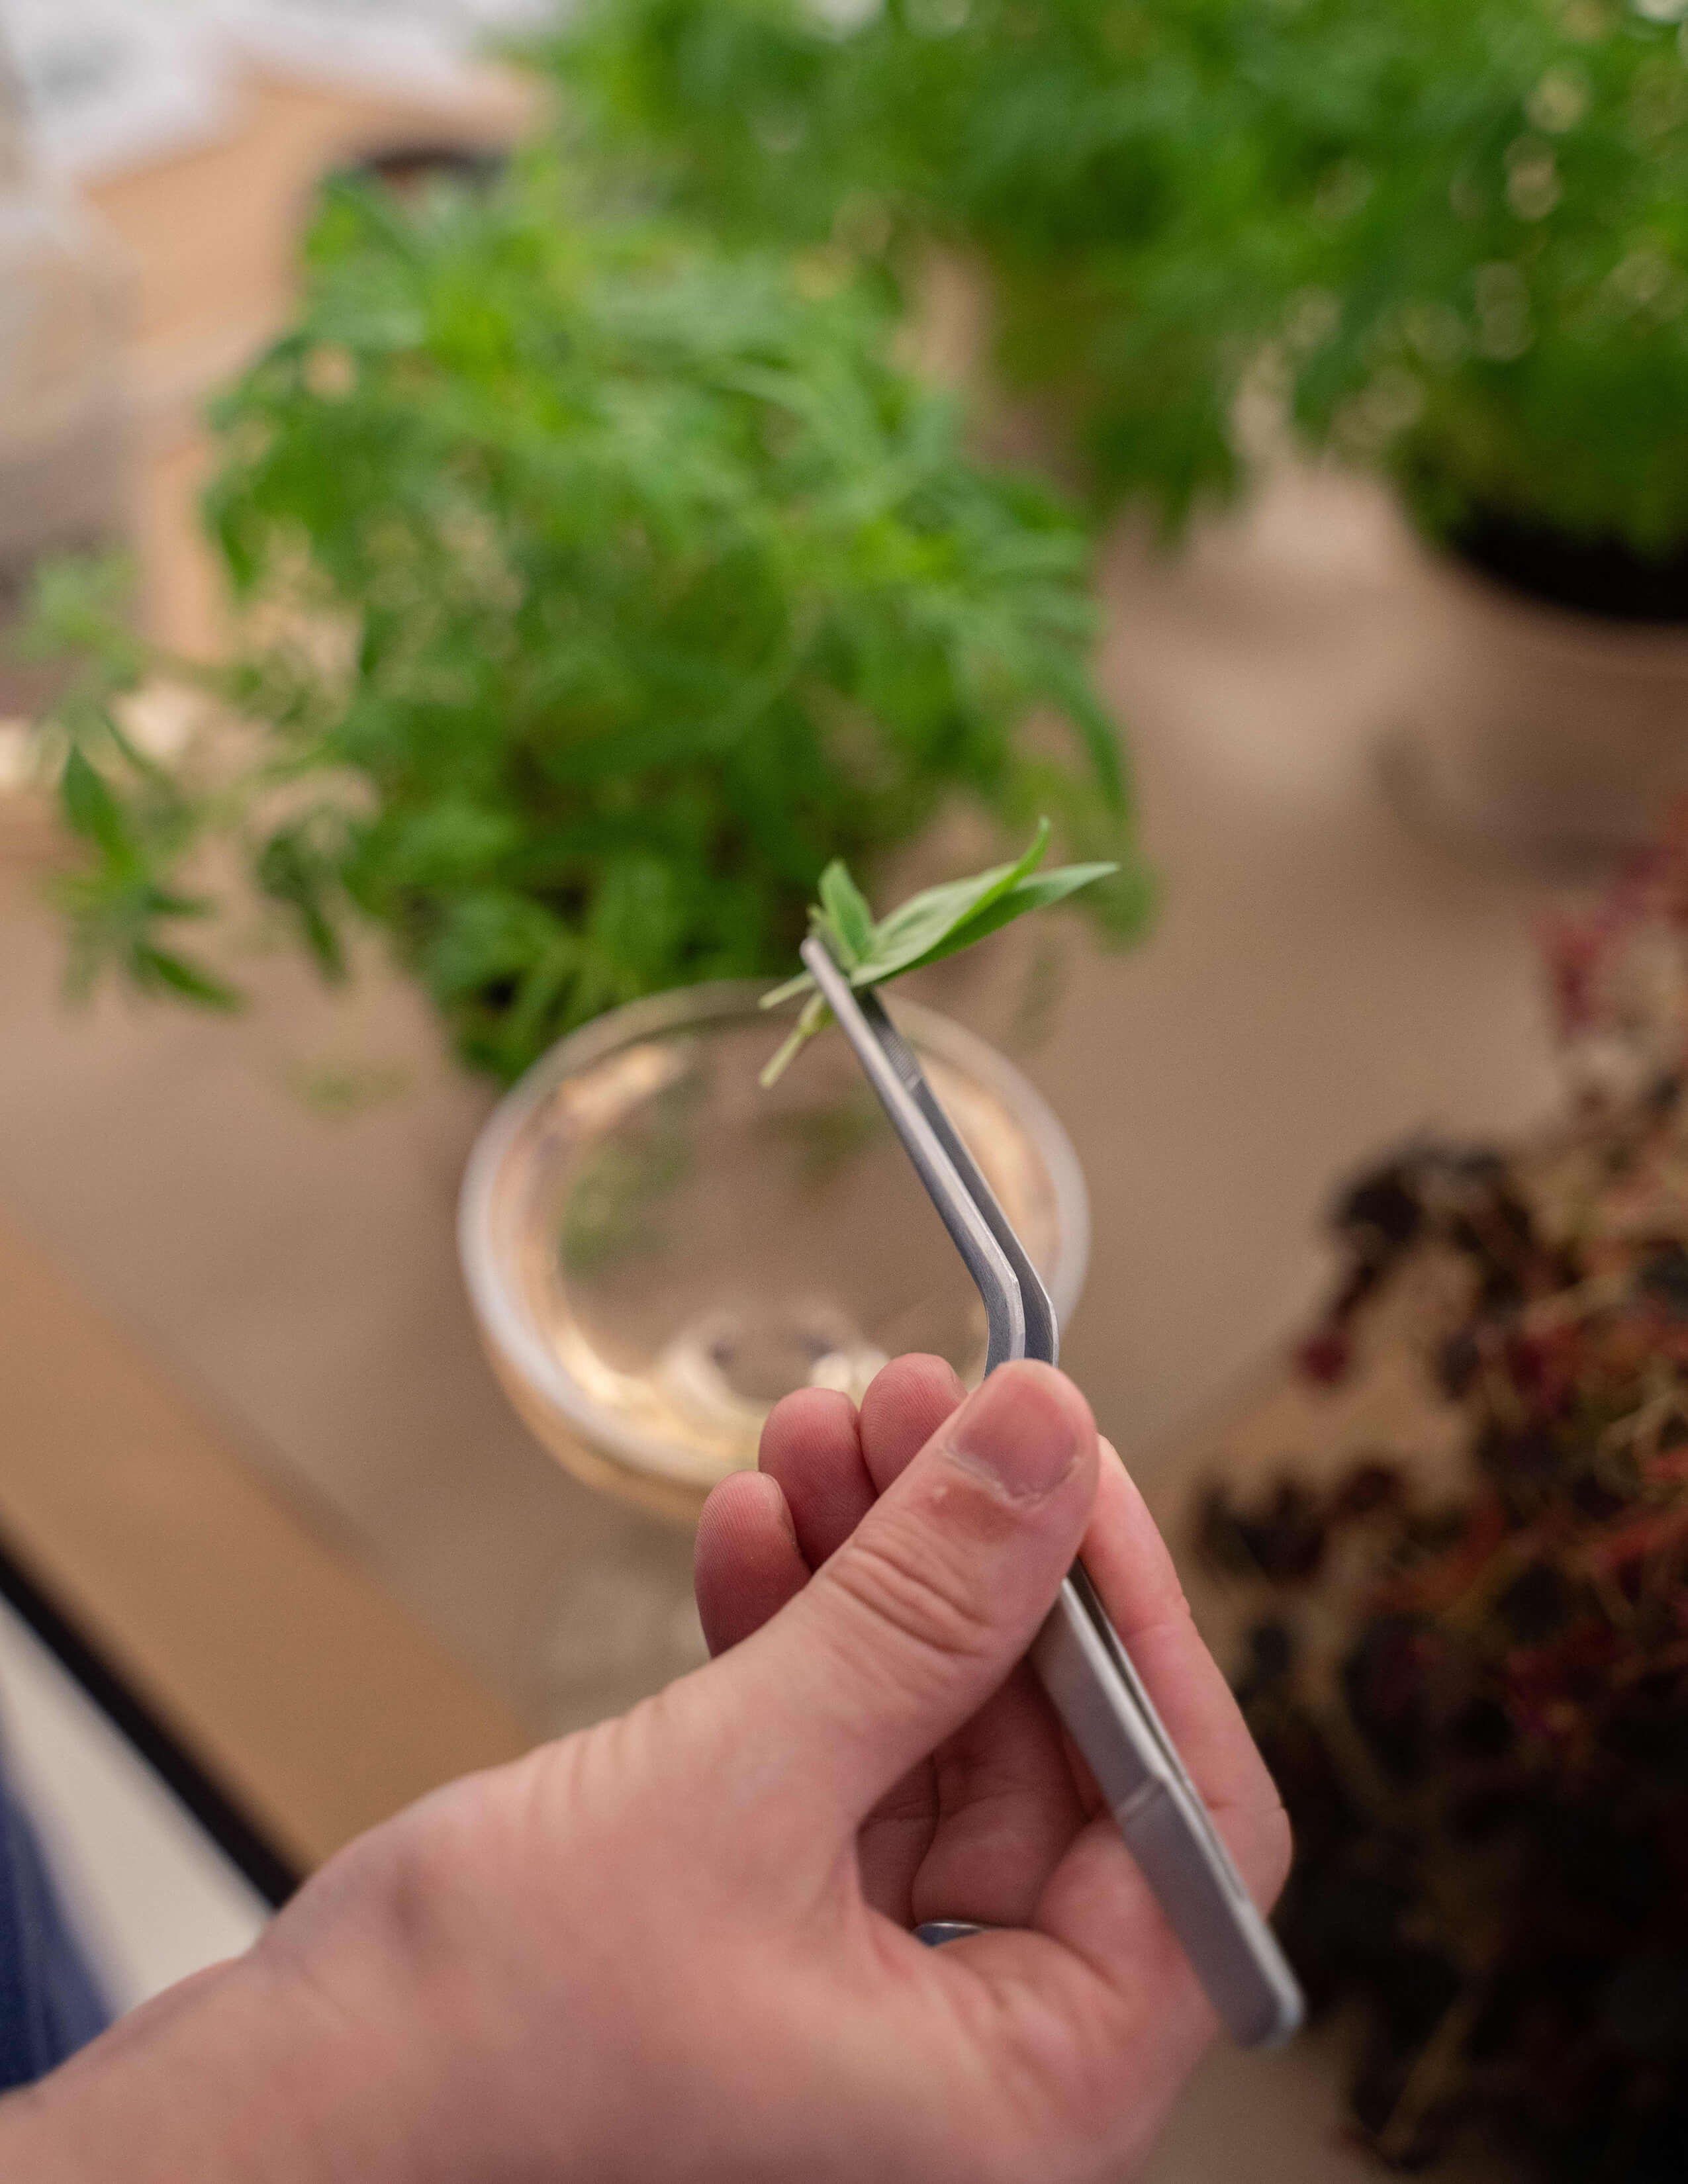 A hand used a tweezer to pick up some leaves from the plant.